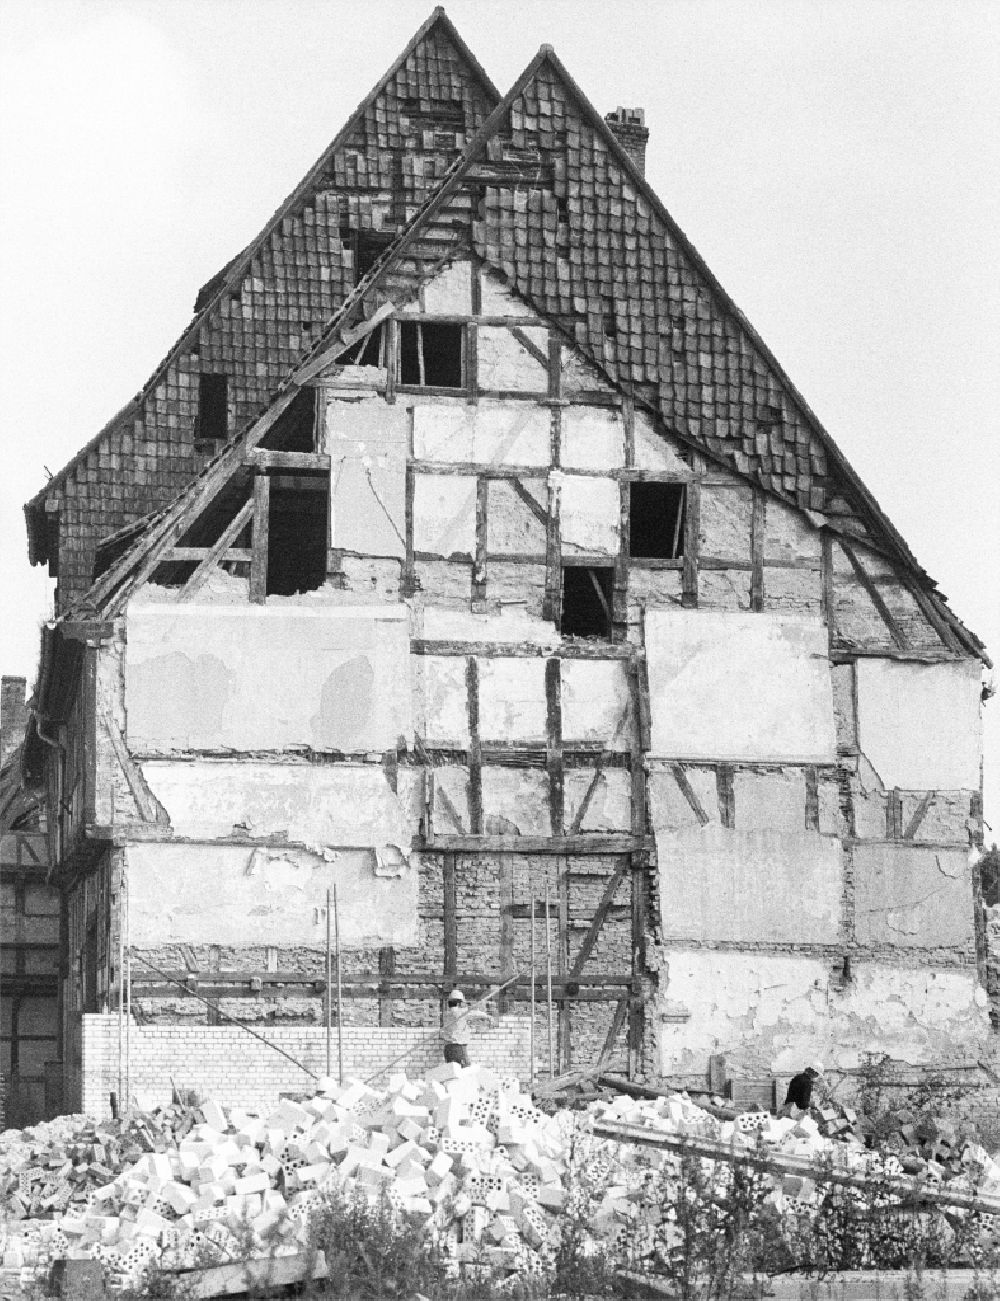 GDR image archive: Halberstadt - Rubble and ruins Rest of the facade and roof structure of the half-timbered house an der Groeperstrasse in Halberstadt in the state Saxony-Anhalt on the territory of the former GDR, German Democratic Republic